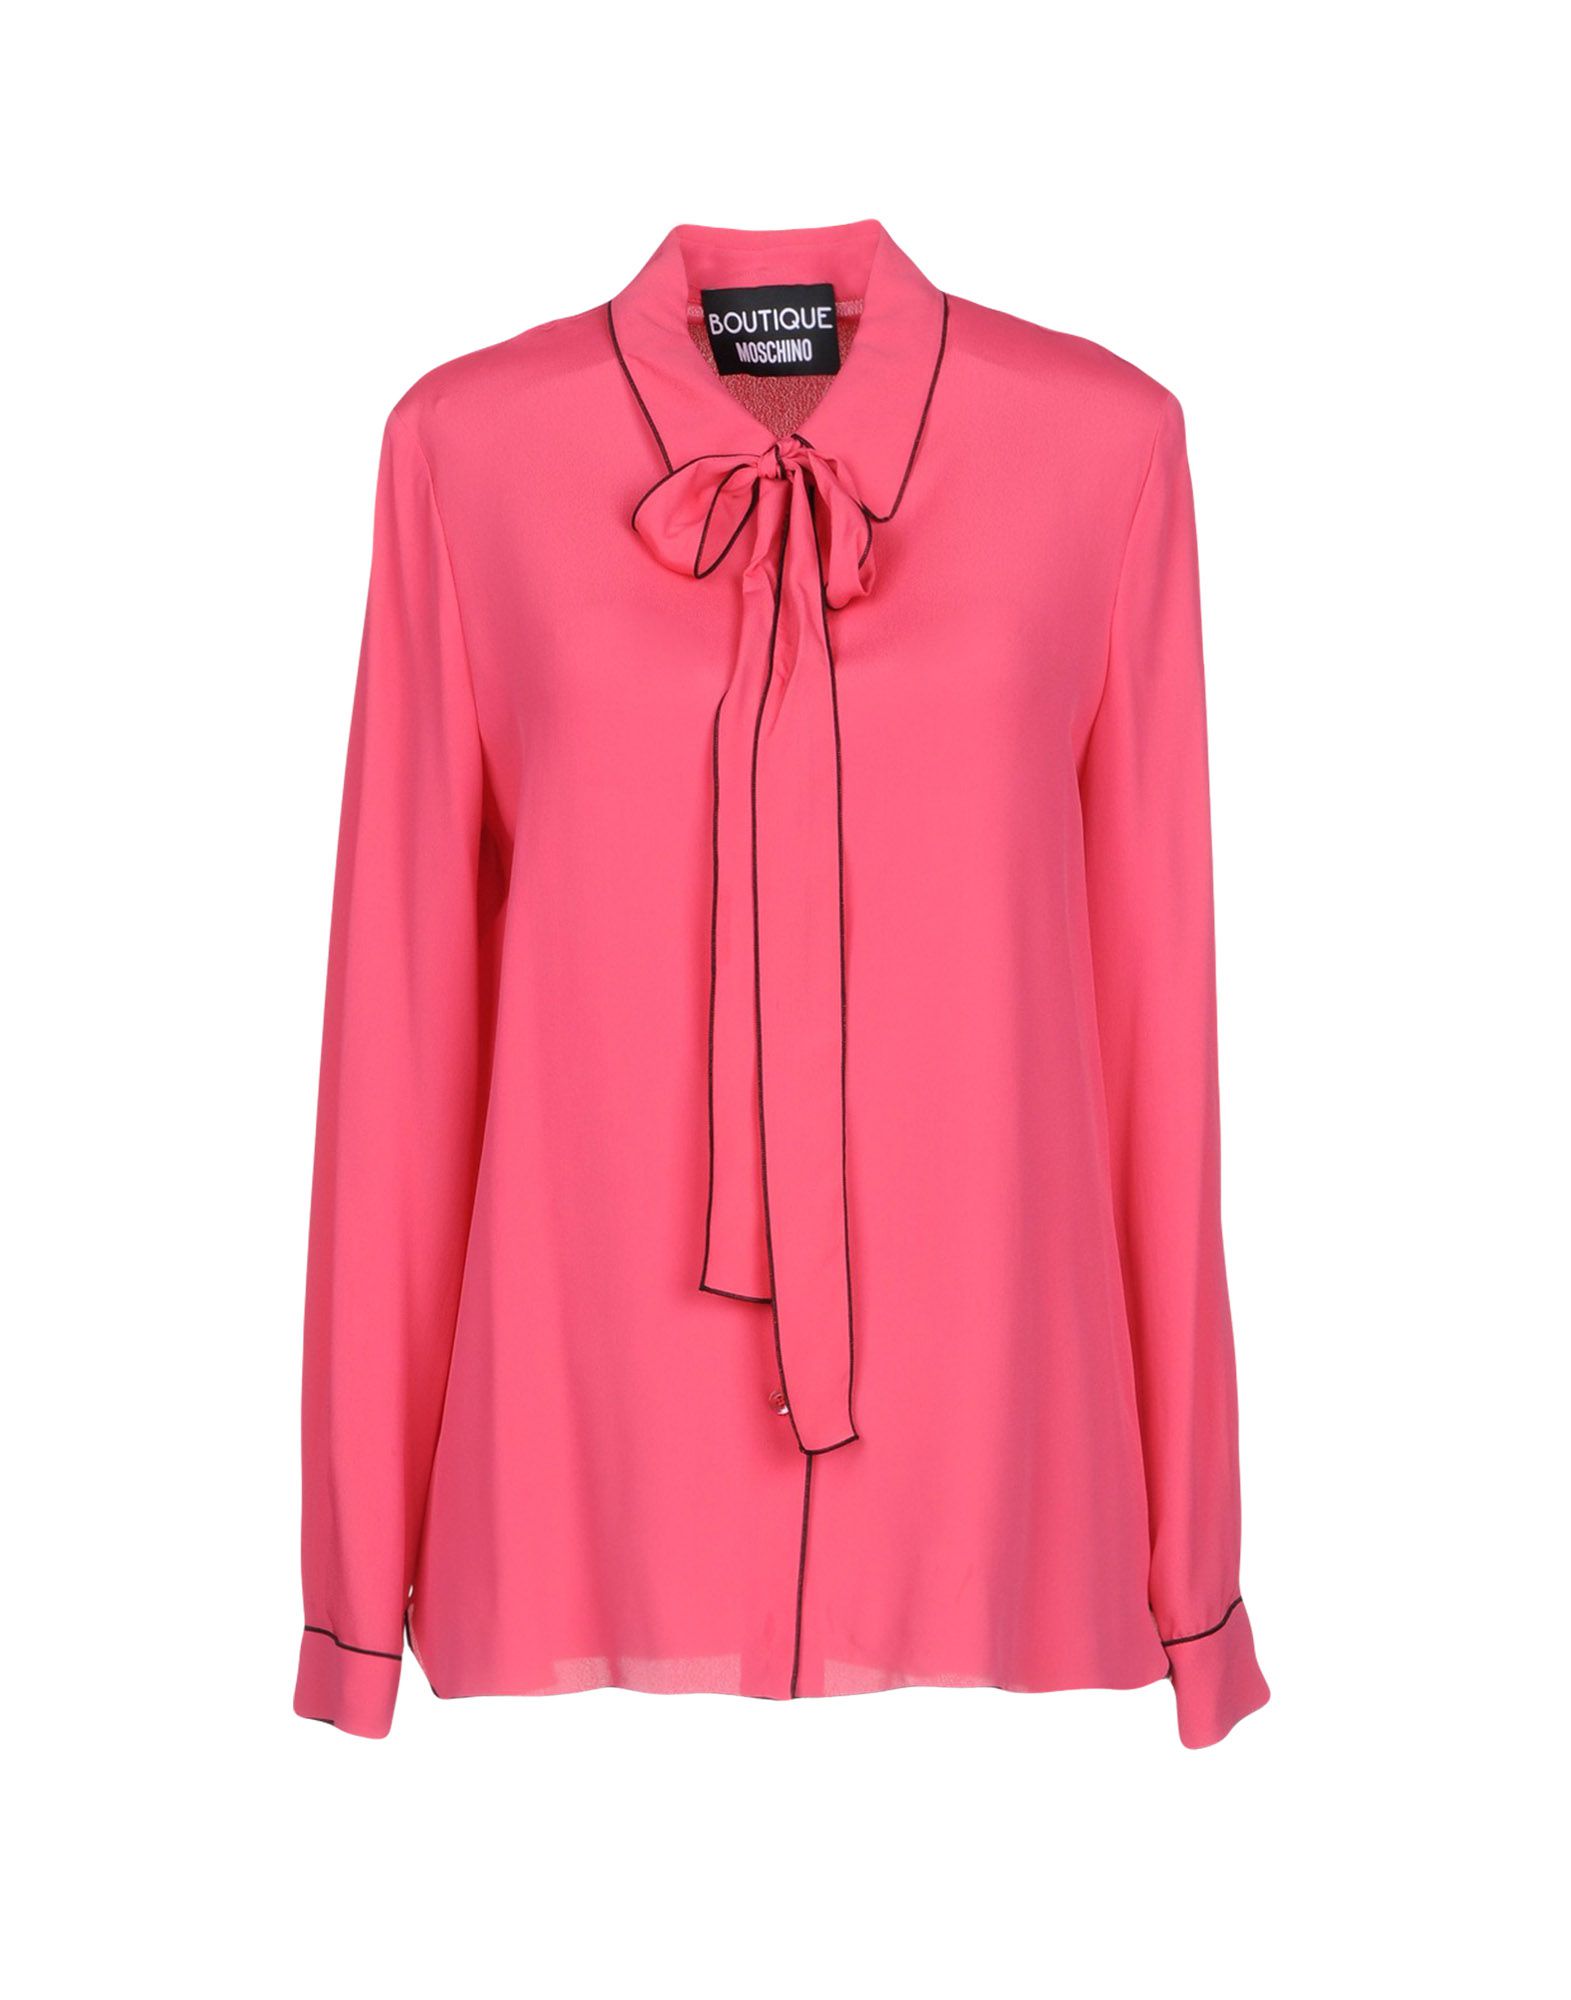 BOUTIQUE MOSCHINO Solid color shirts & blouses,38720990AM 4